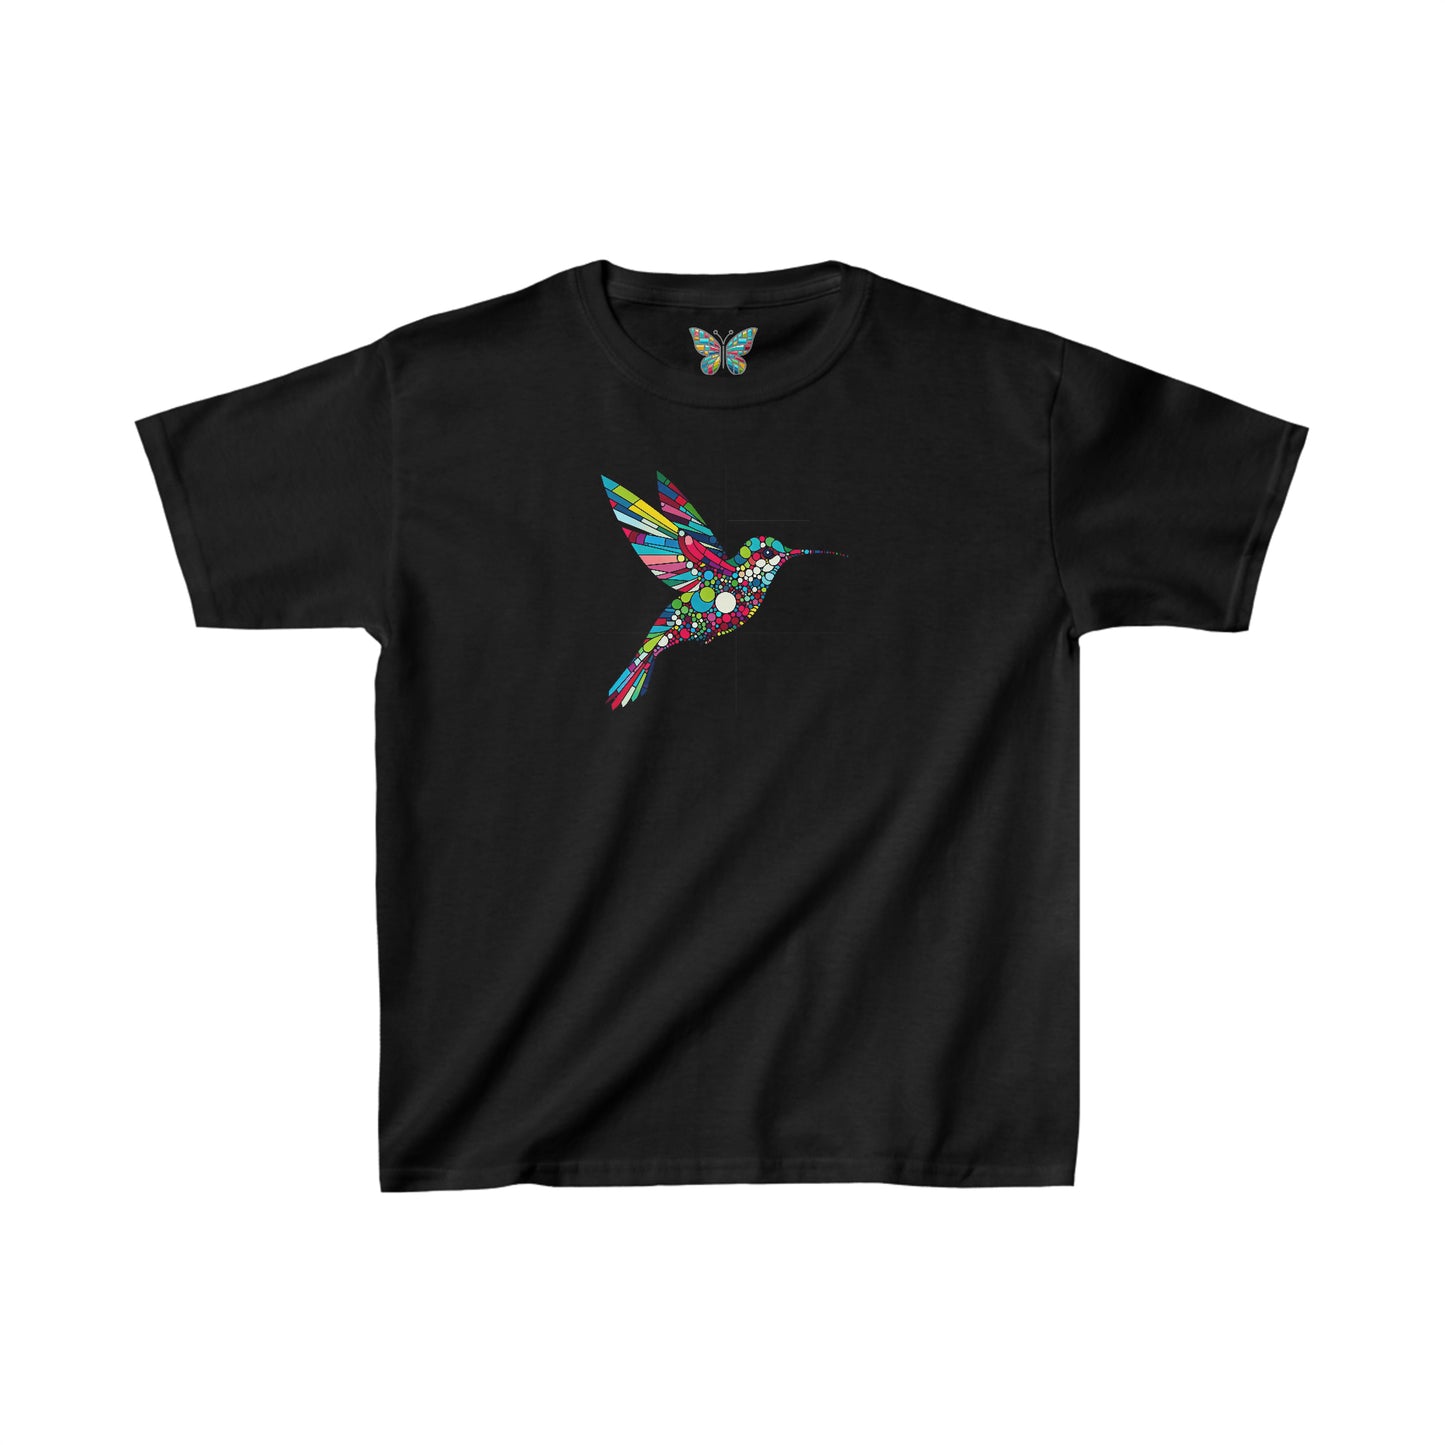 Hummingbird Serencolority - Youth - Snazzle Tee